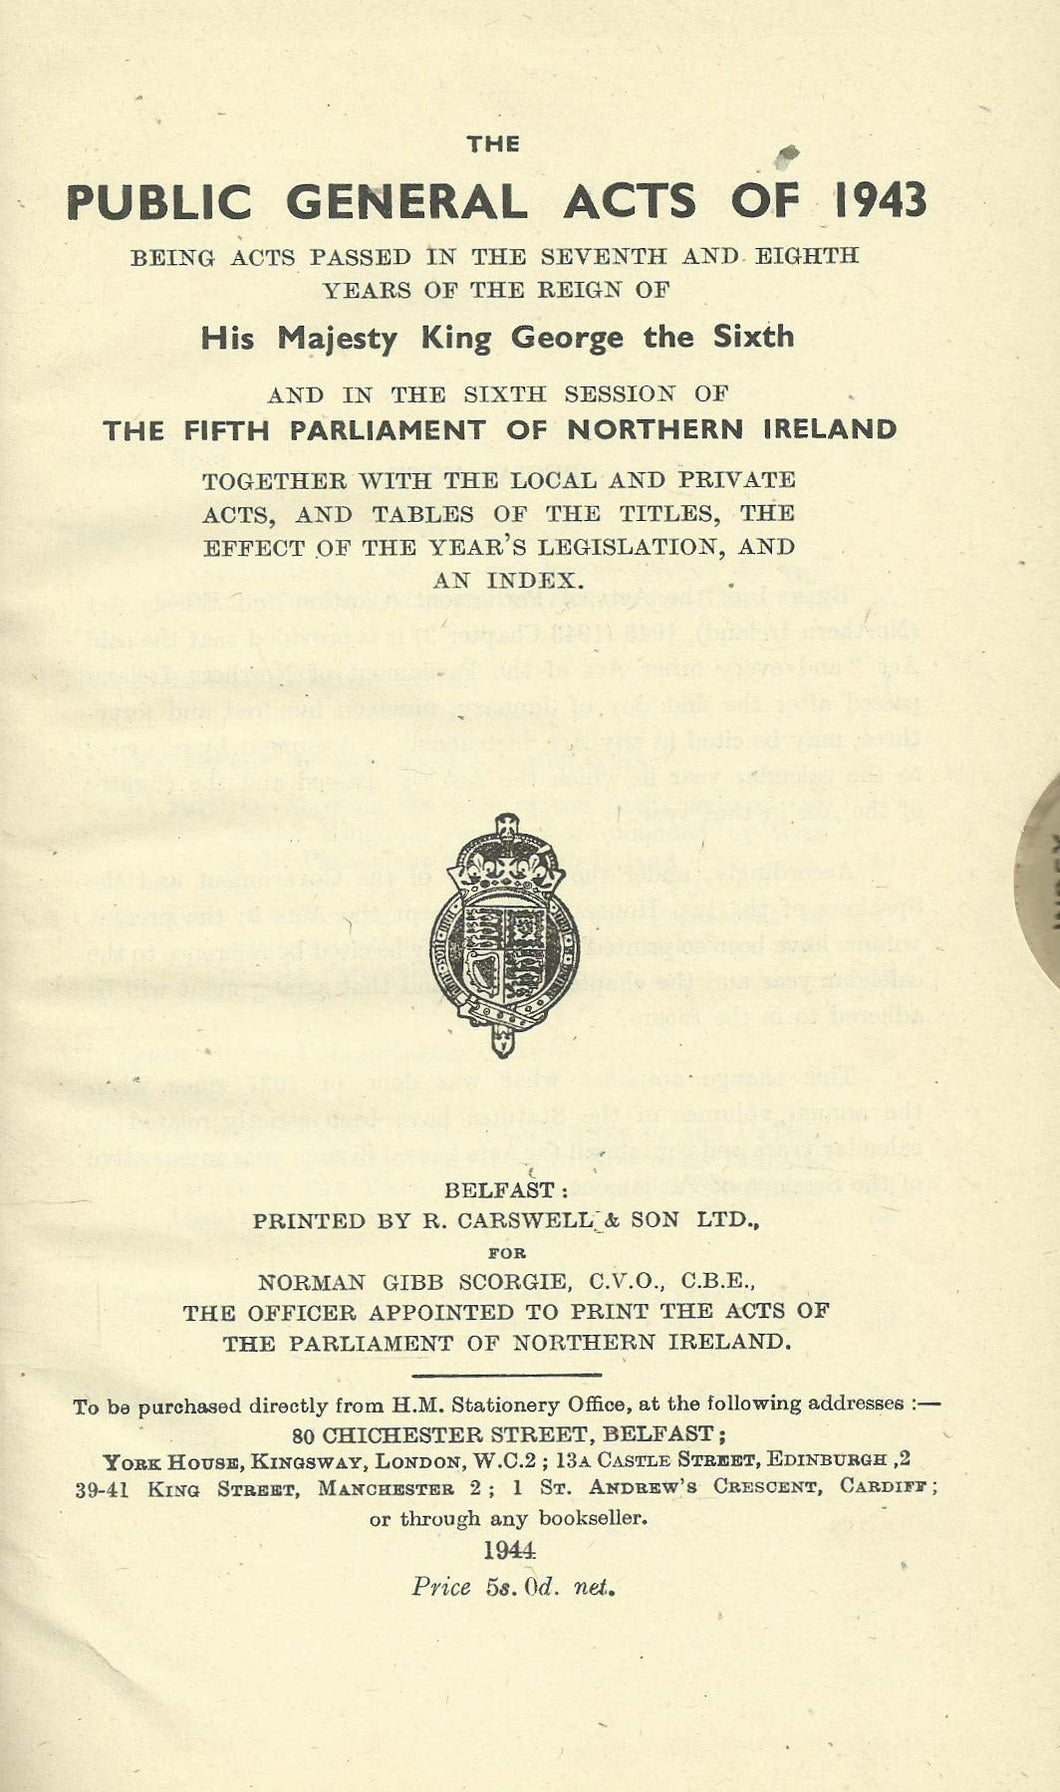 Northern Ireland Statutes: The Public General Acts 1943